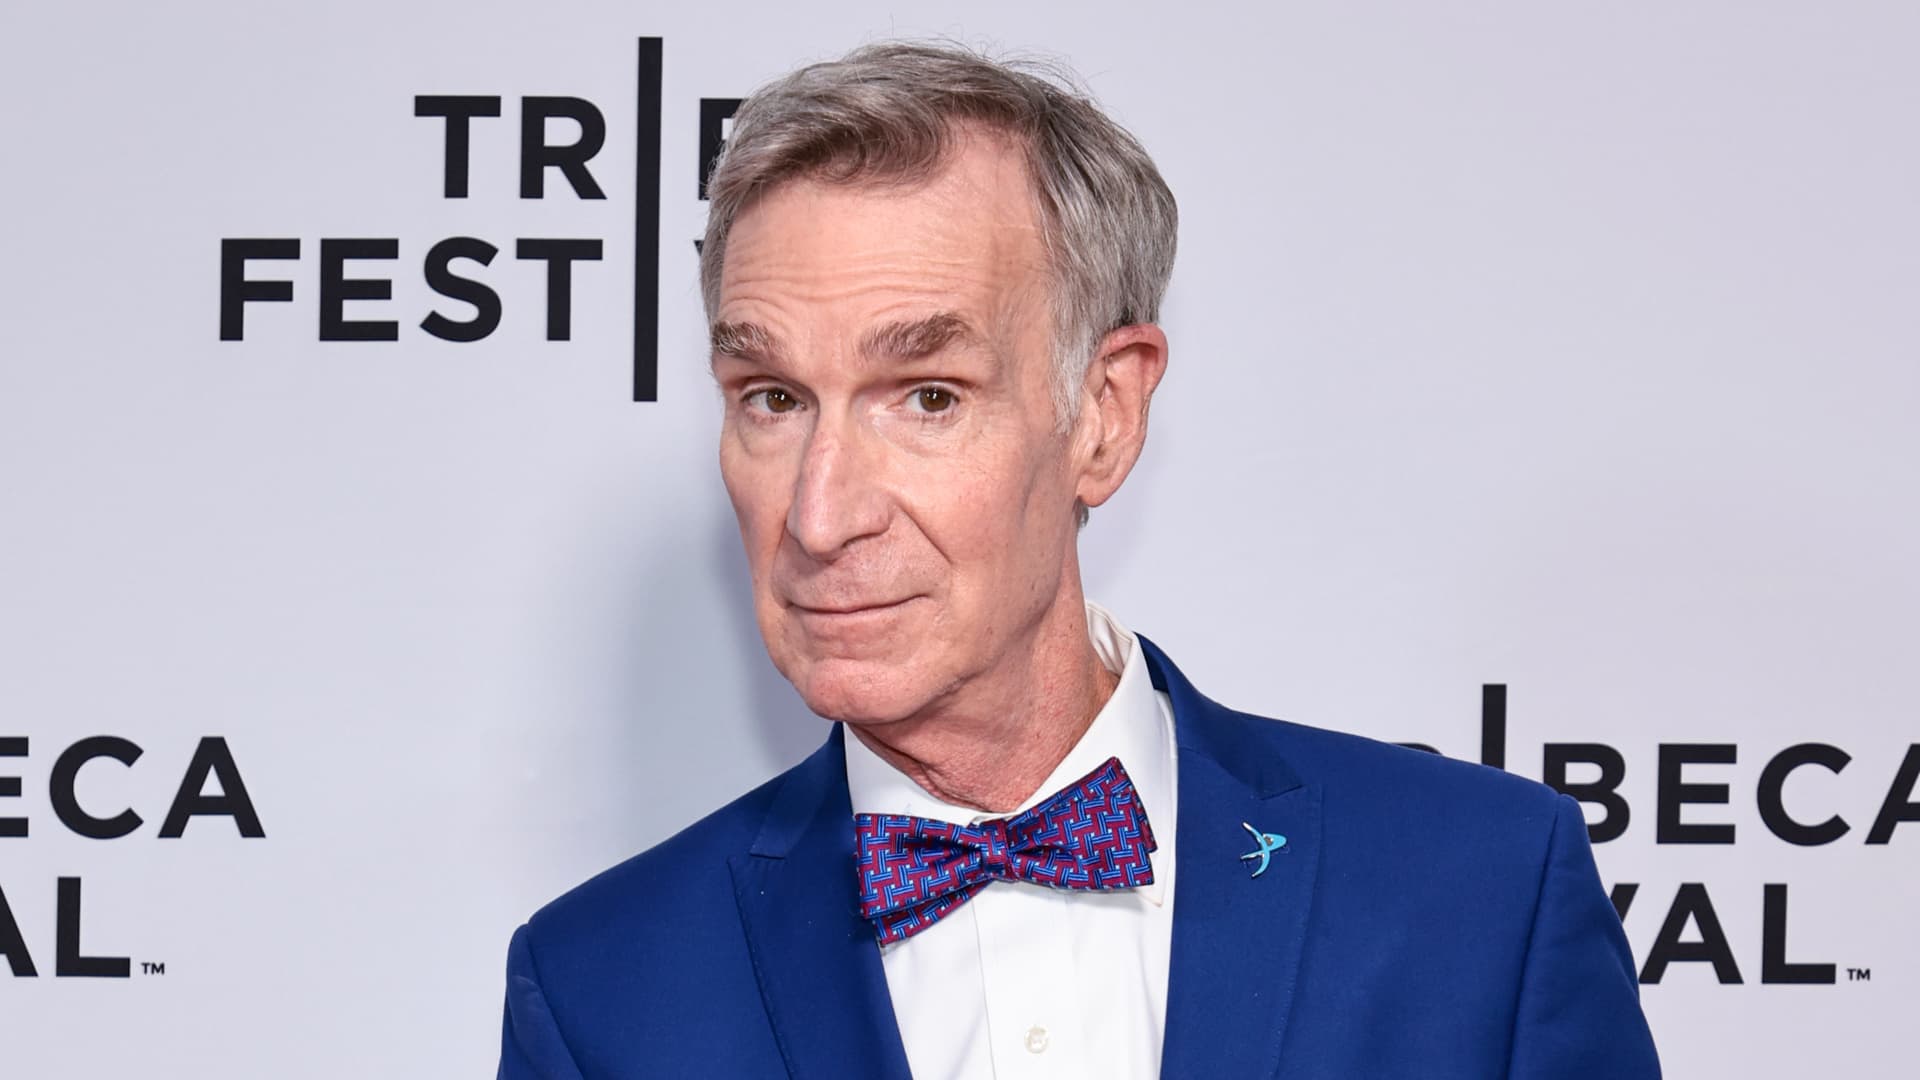 Bill Nye: The best way to fight climate change is by voting